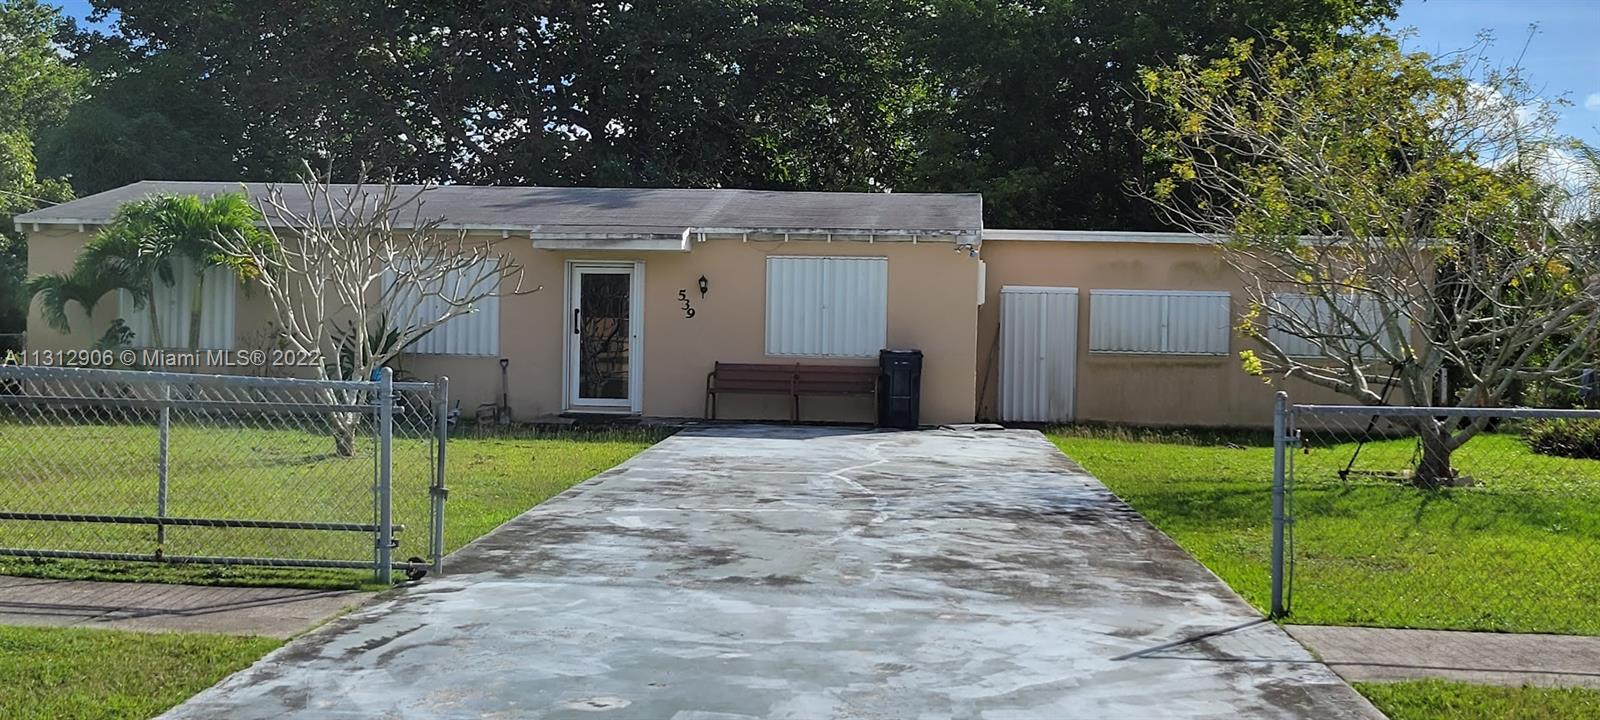 Great opportunity to own this 4 Bds. 3 Baths. Single Family Home on a Huge 15,000 SQ FT LOT WITH NO HOA!! Perfect for a Boat, Pool, RV or anything you want to do with so much land. It has accordian shutters throughout The master has walk-ins with a huge family room. Nice kitchen cabinets with all appliances, including W&D. Bathrooms need some TLC. Do not miss this opportunity!!